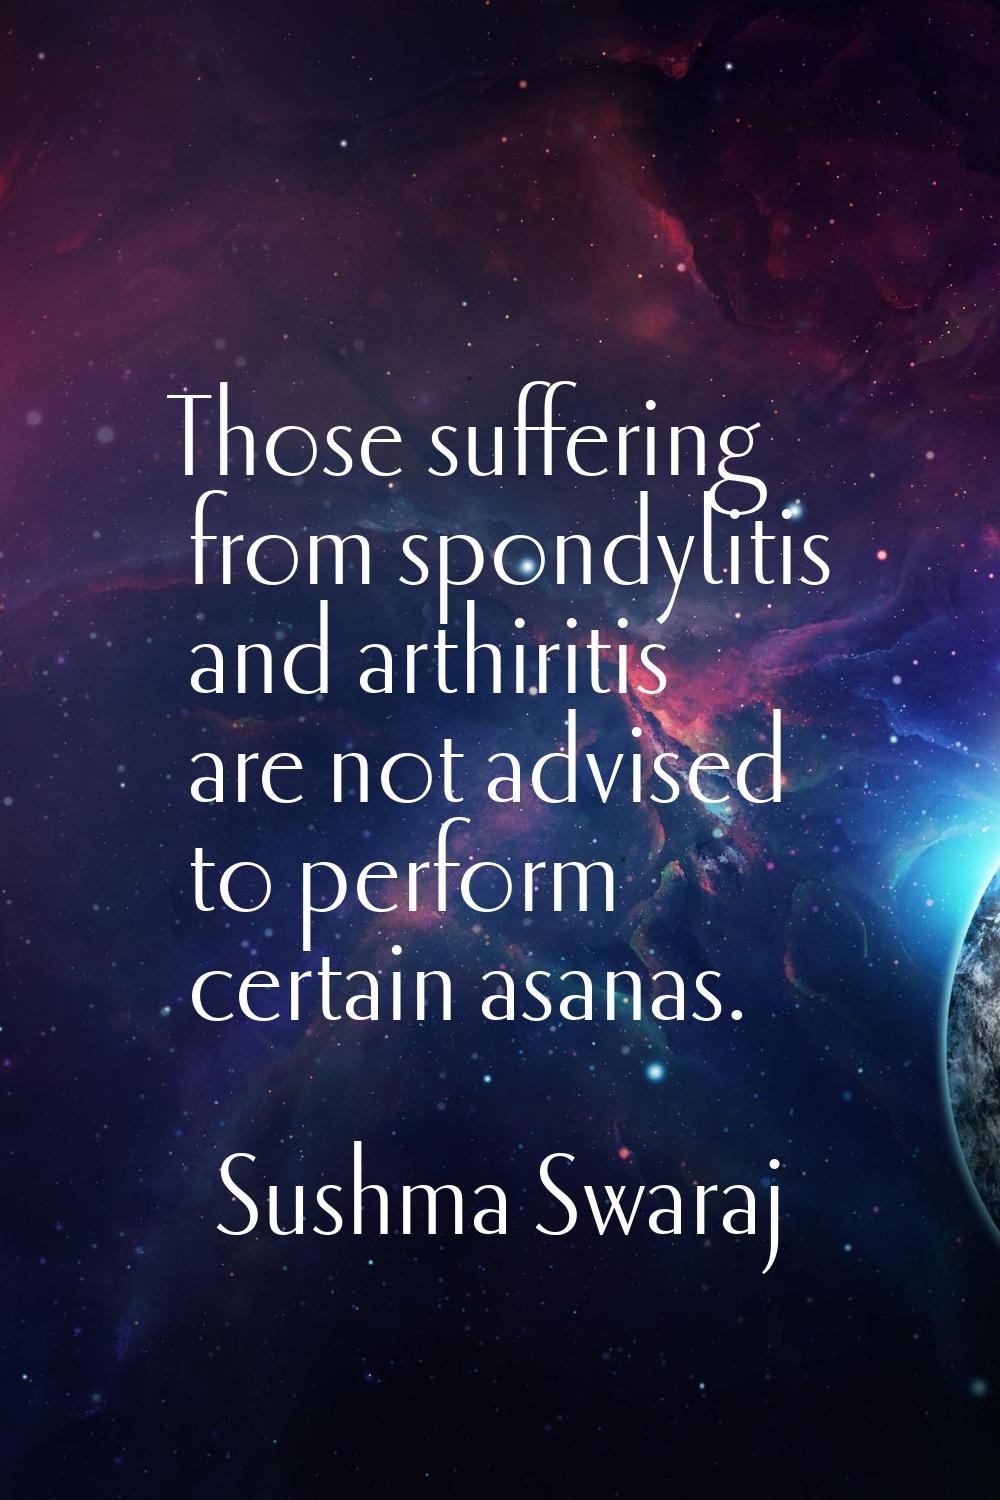 Those suffering from spondylitis and arthiritis are not advised to perform certain asanas.